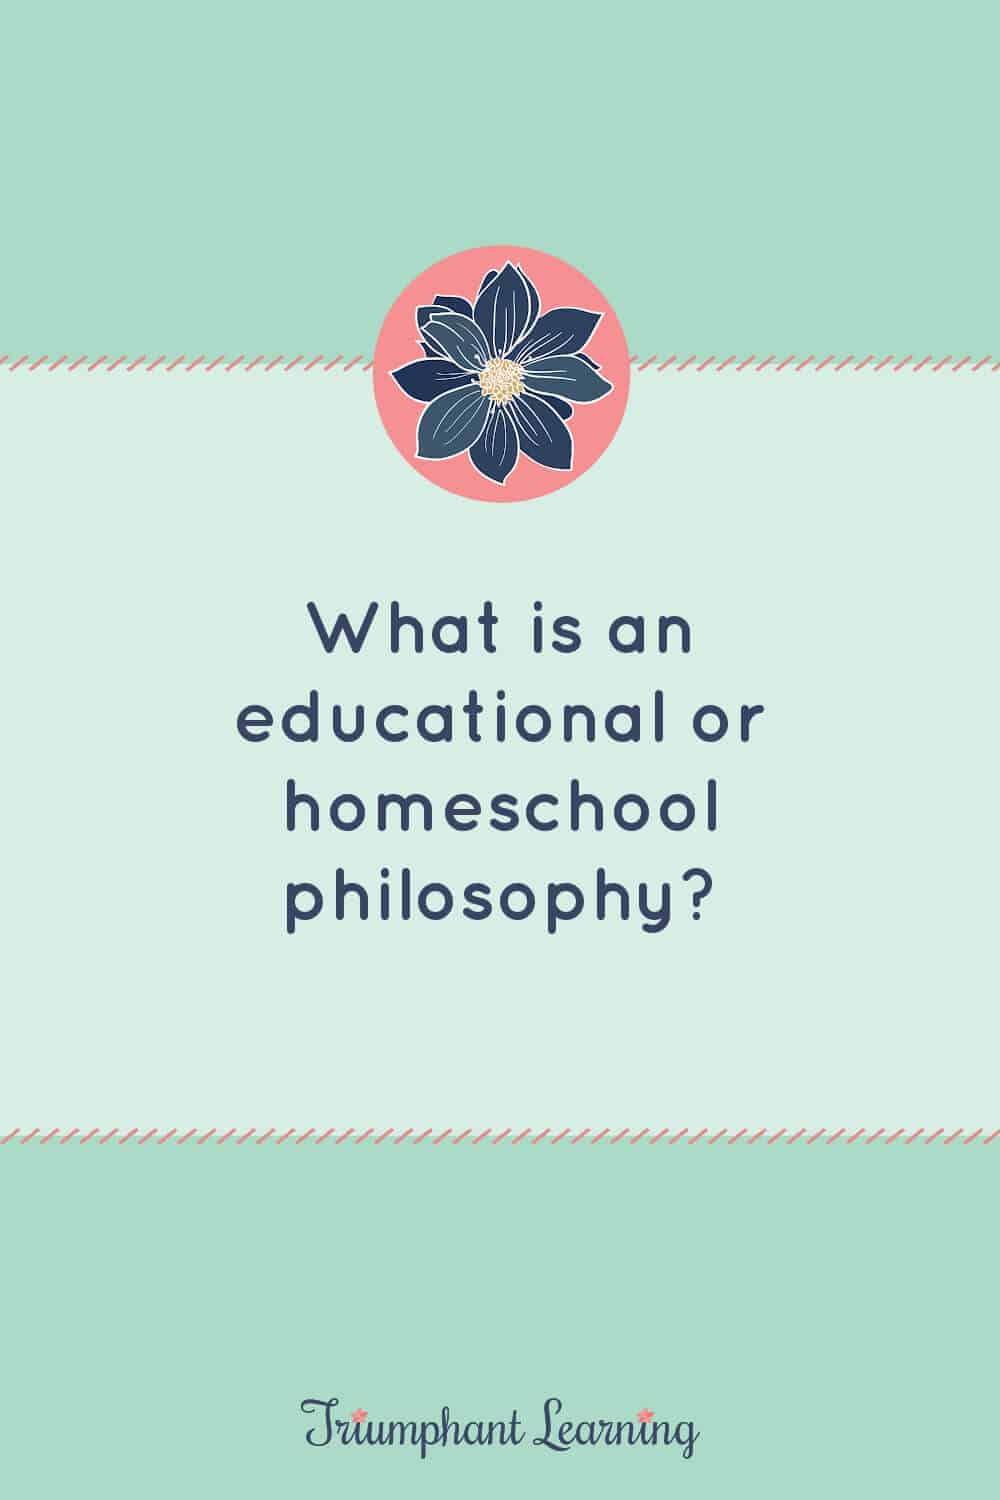 Learn what you need to know to choose a homeschool philosophy. Includes an overview and resource suggestions of seven common homeschool approaches. via @TriLearning